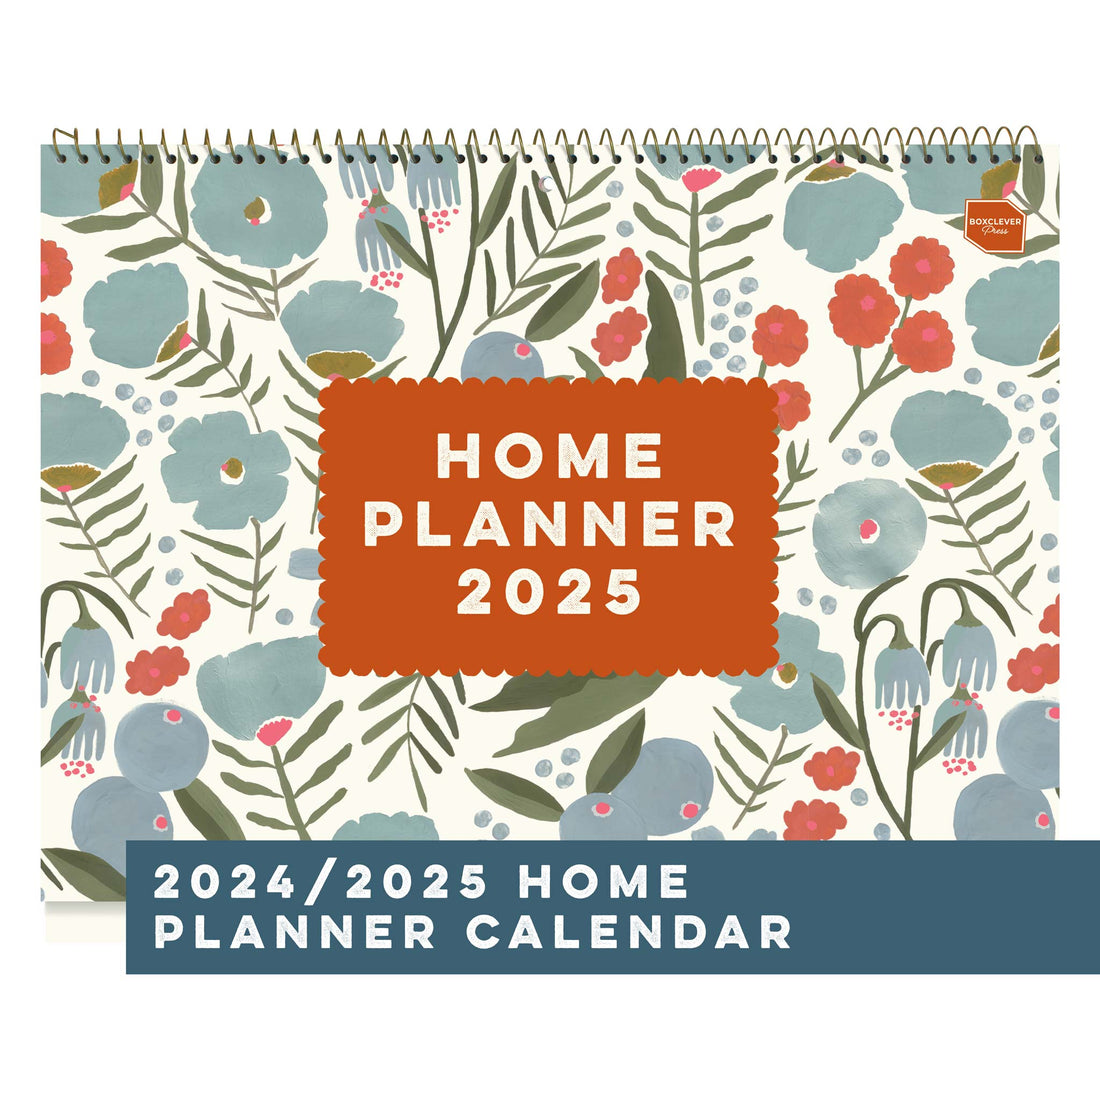 Boxclever Press Home Planner Calendar 2025 with a floral cover